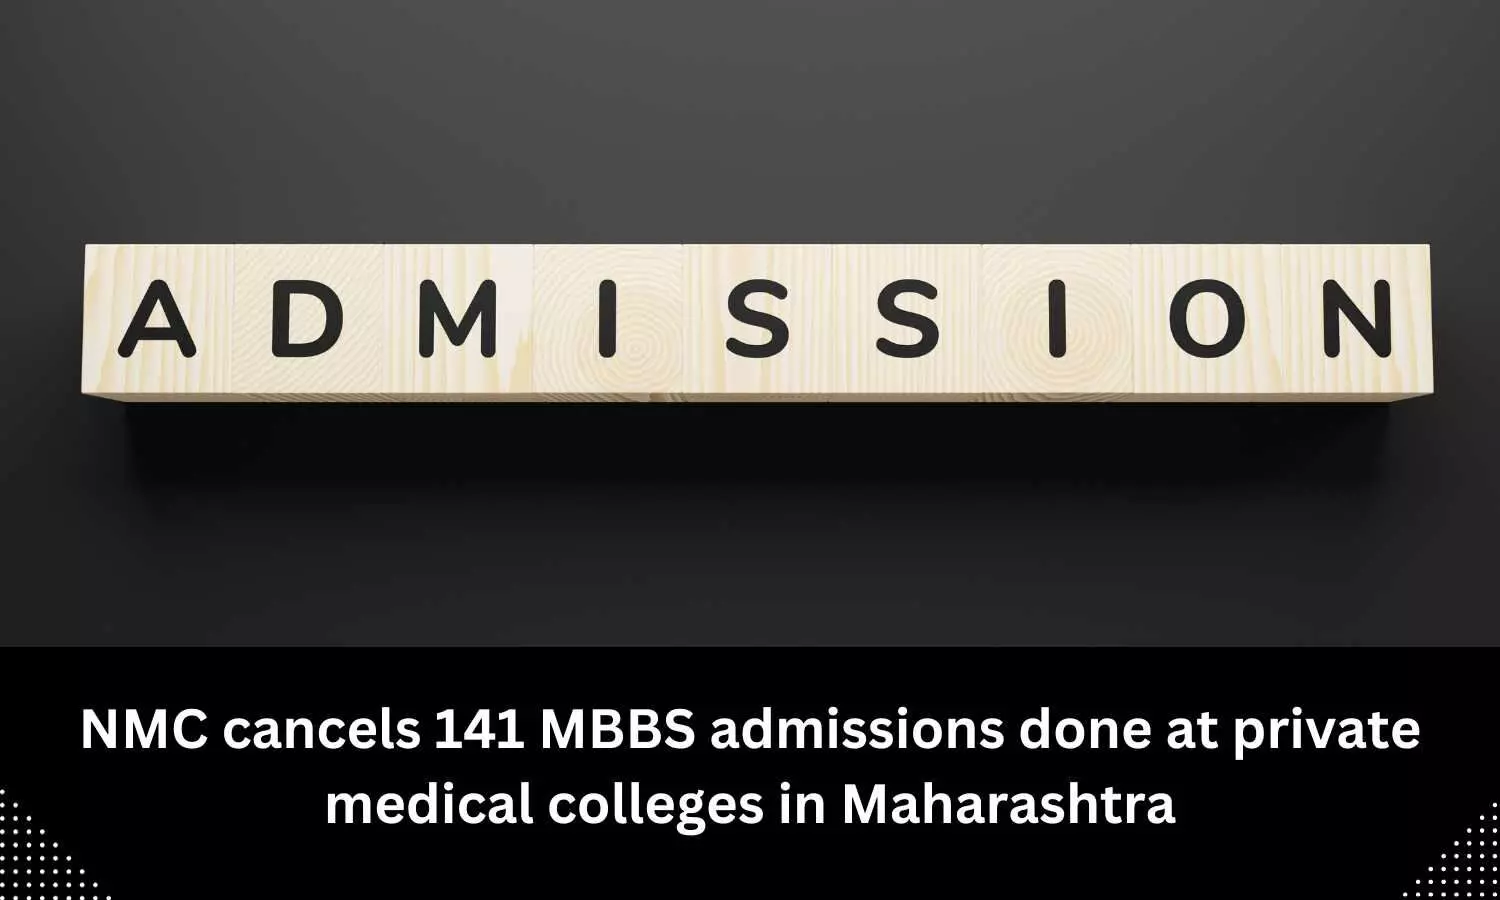 NMC cancels 141 stray vacancy round MBBS admissions in private medical colleges in Maharashtra